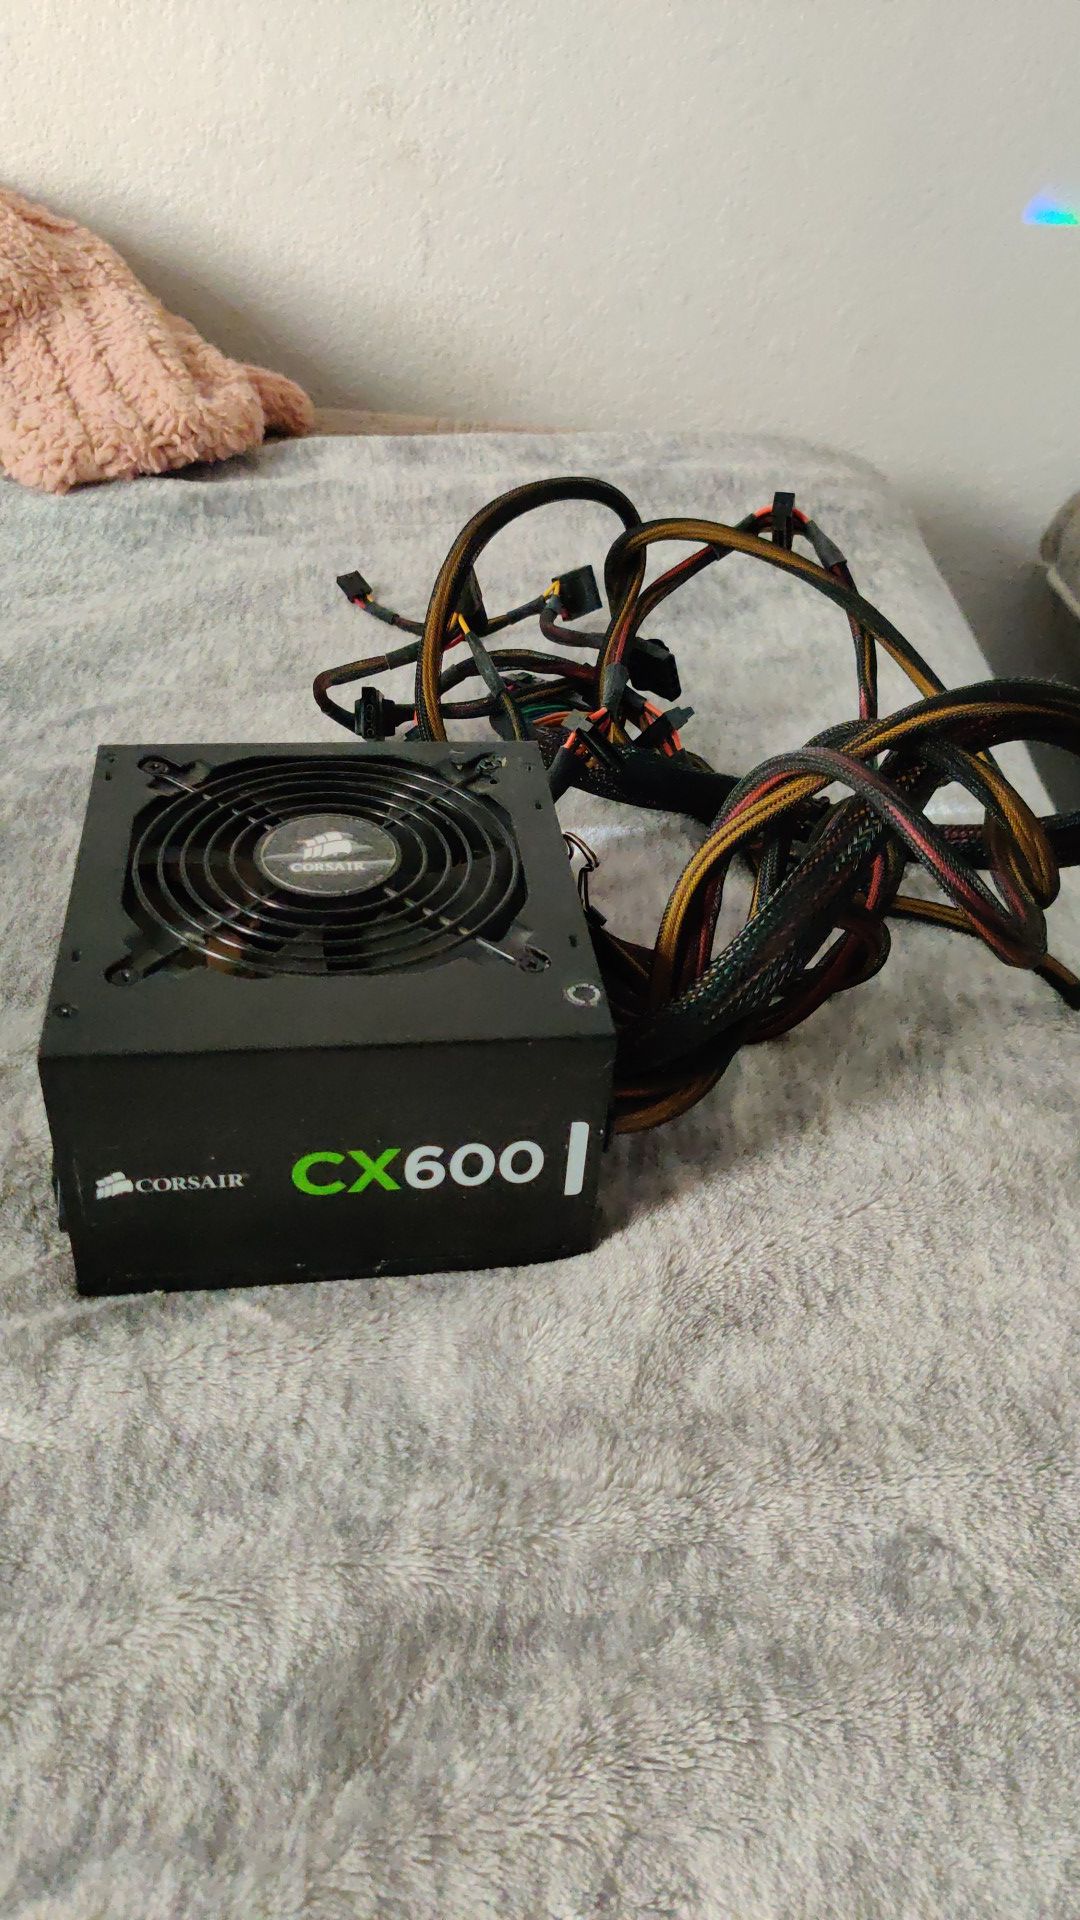 Corsair cx600 power supply for gaming computer